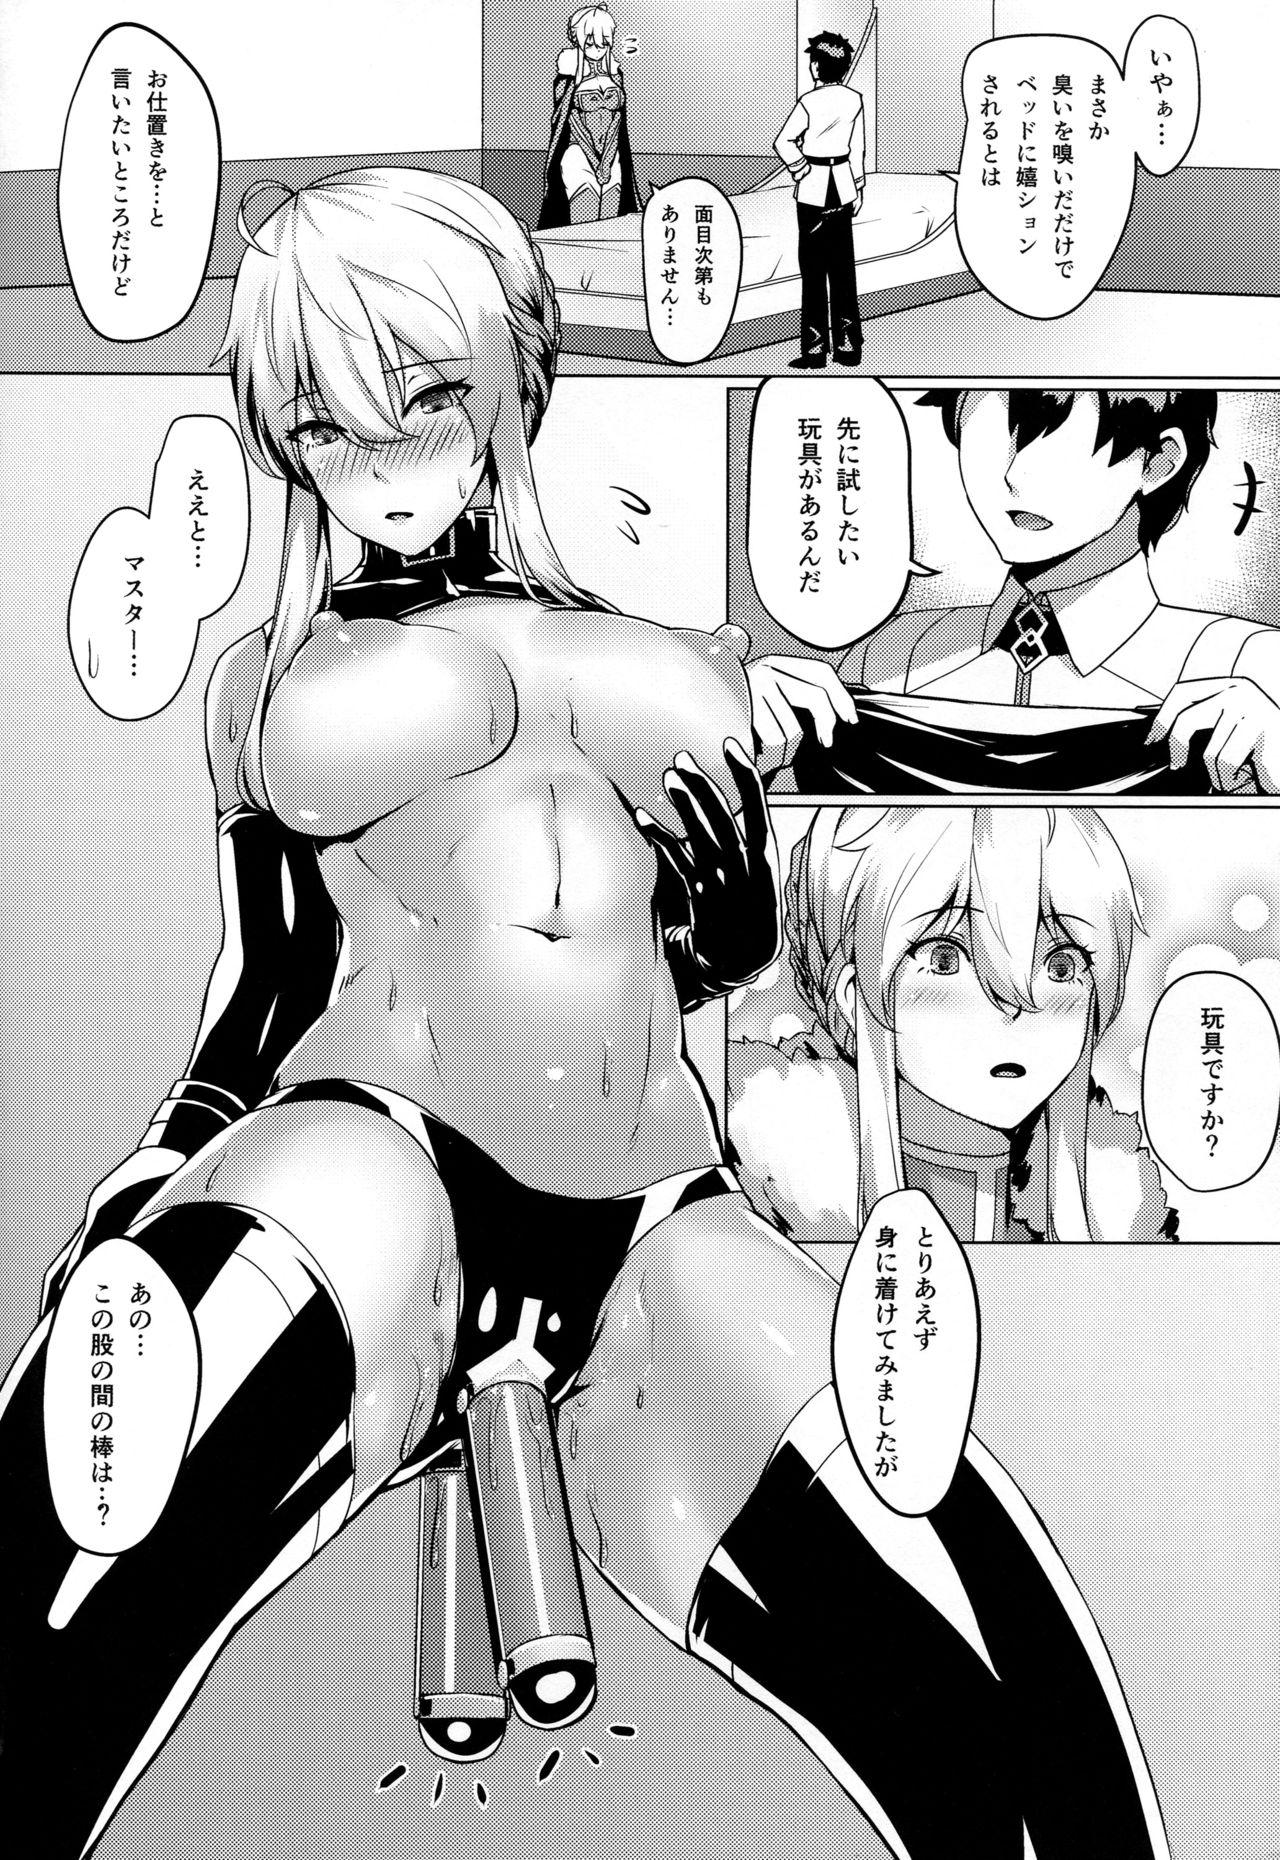 Real Amatuer Porn Like Attracts Like - Fate grand order Gay Youngmen - Page 7